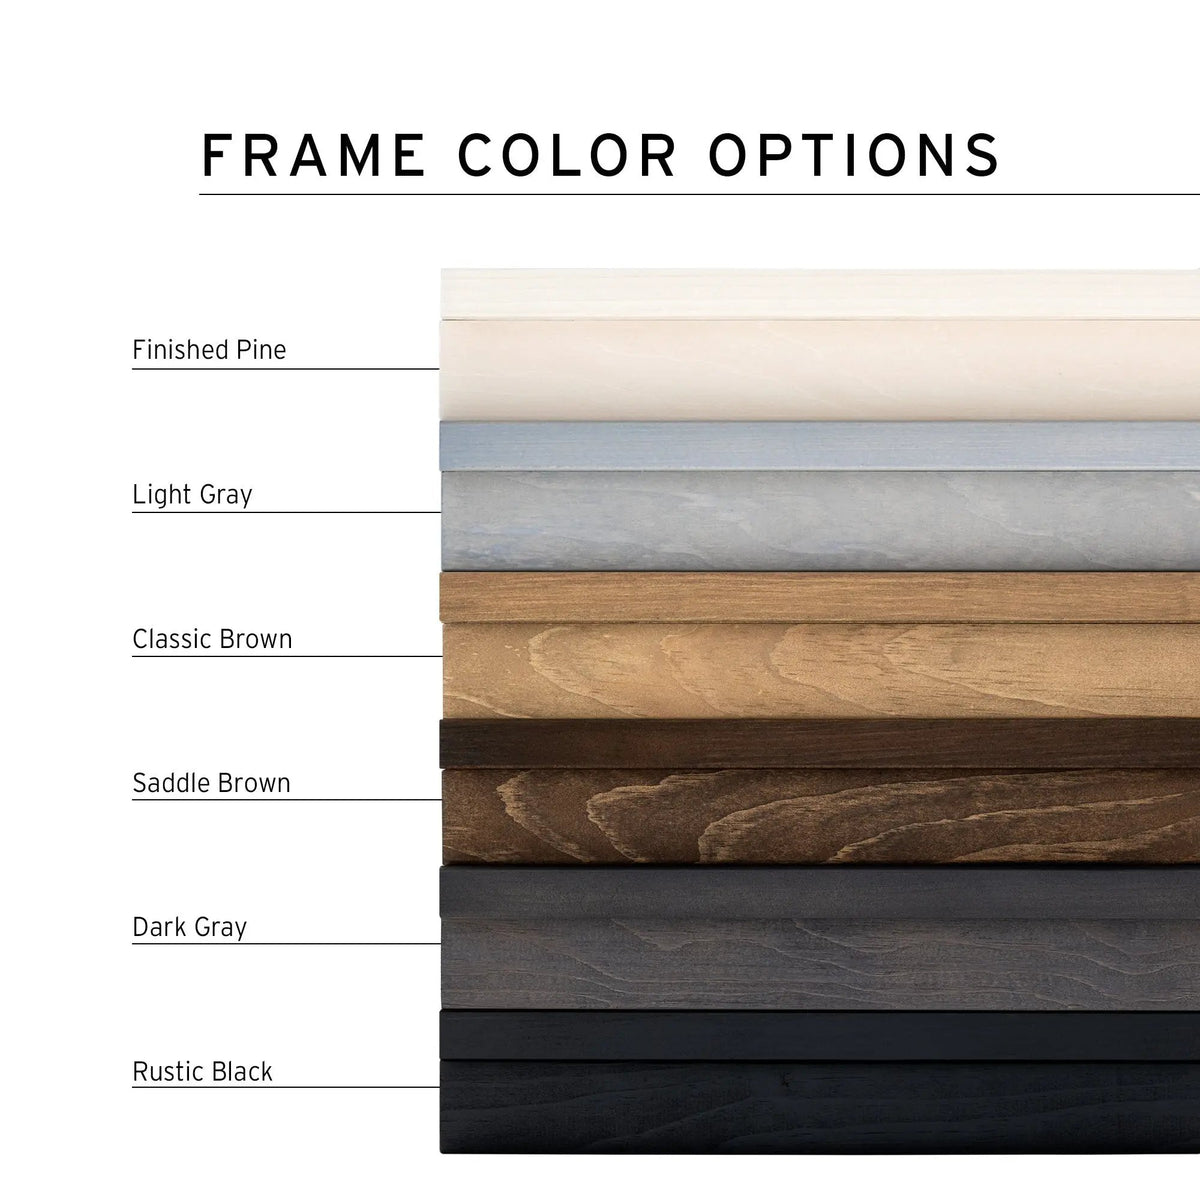 the frame color options for a mattress